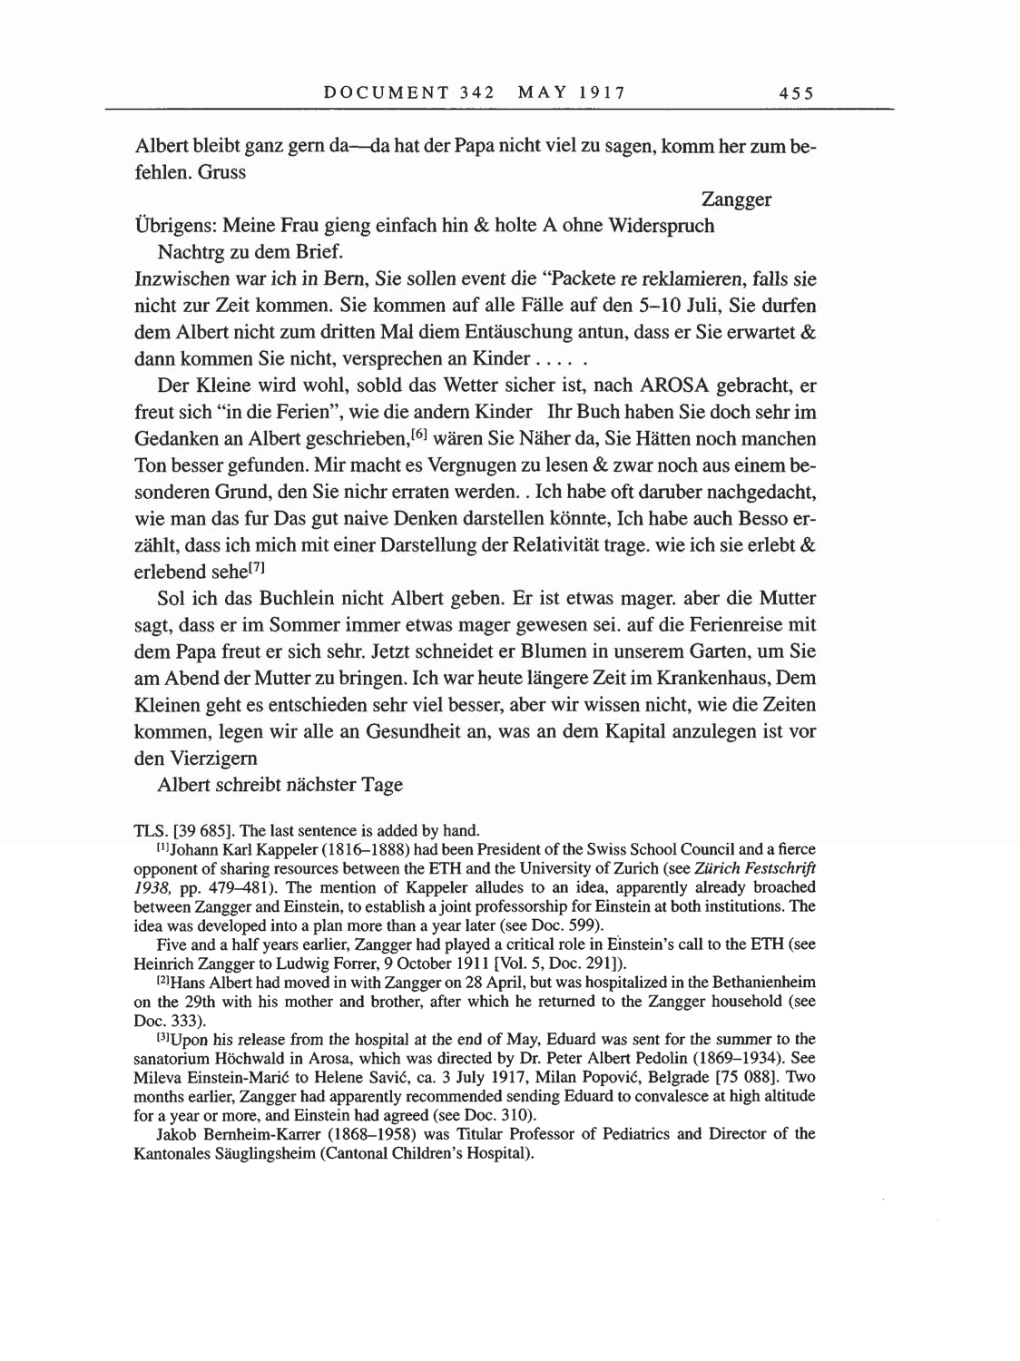 Volume 8, Part A: The Berlin Years: Correspondence 1914-1917 page 455